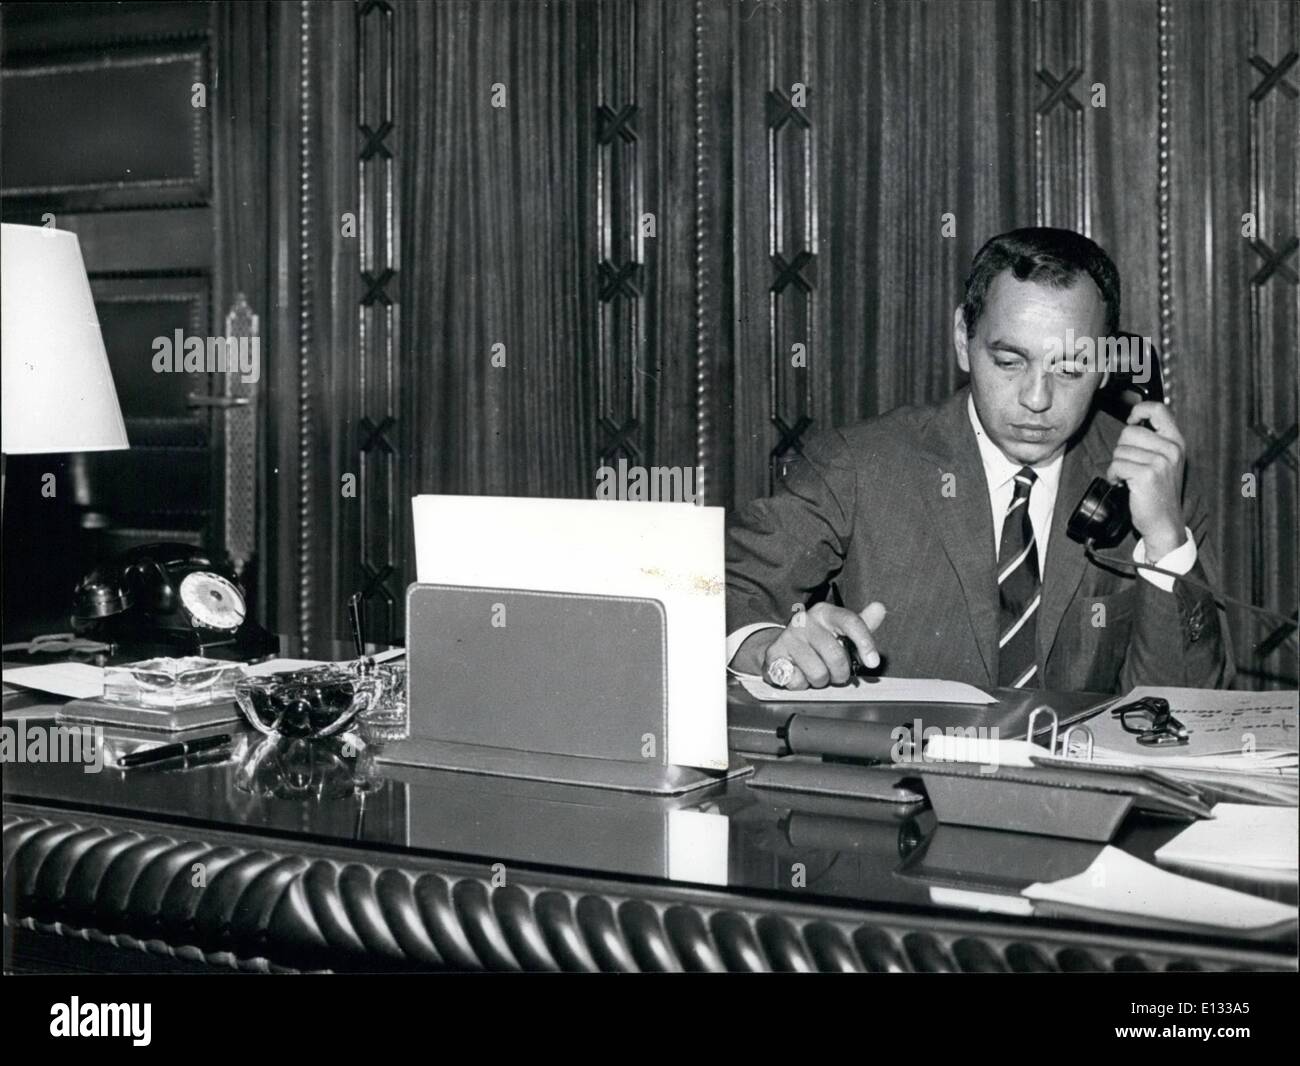 Feb. 26, 2012 - The New King Hassan II of Morocco, at his desk.He scorns secretaries and prefers using the telephone and other methods of direct action only UN-Western thing about him is his huge ring on the little finger of hos right hand. Stock Photo